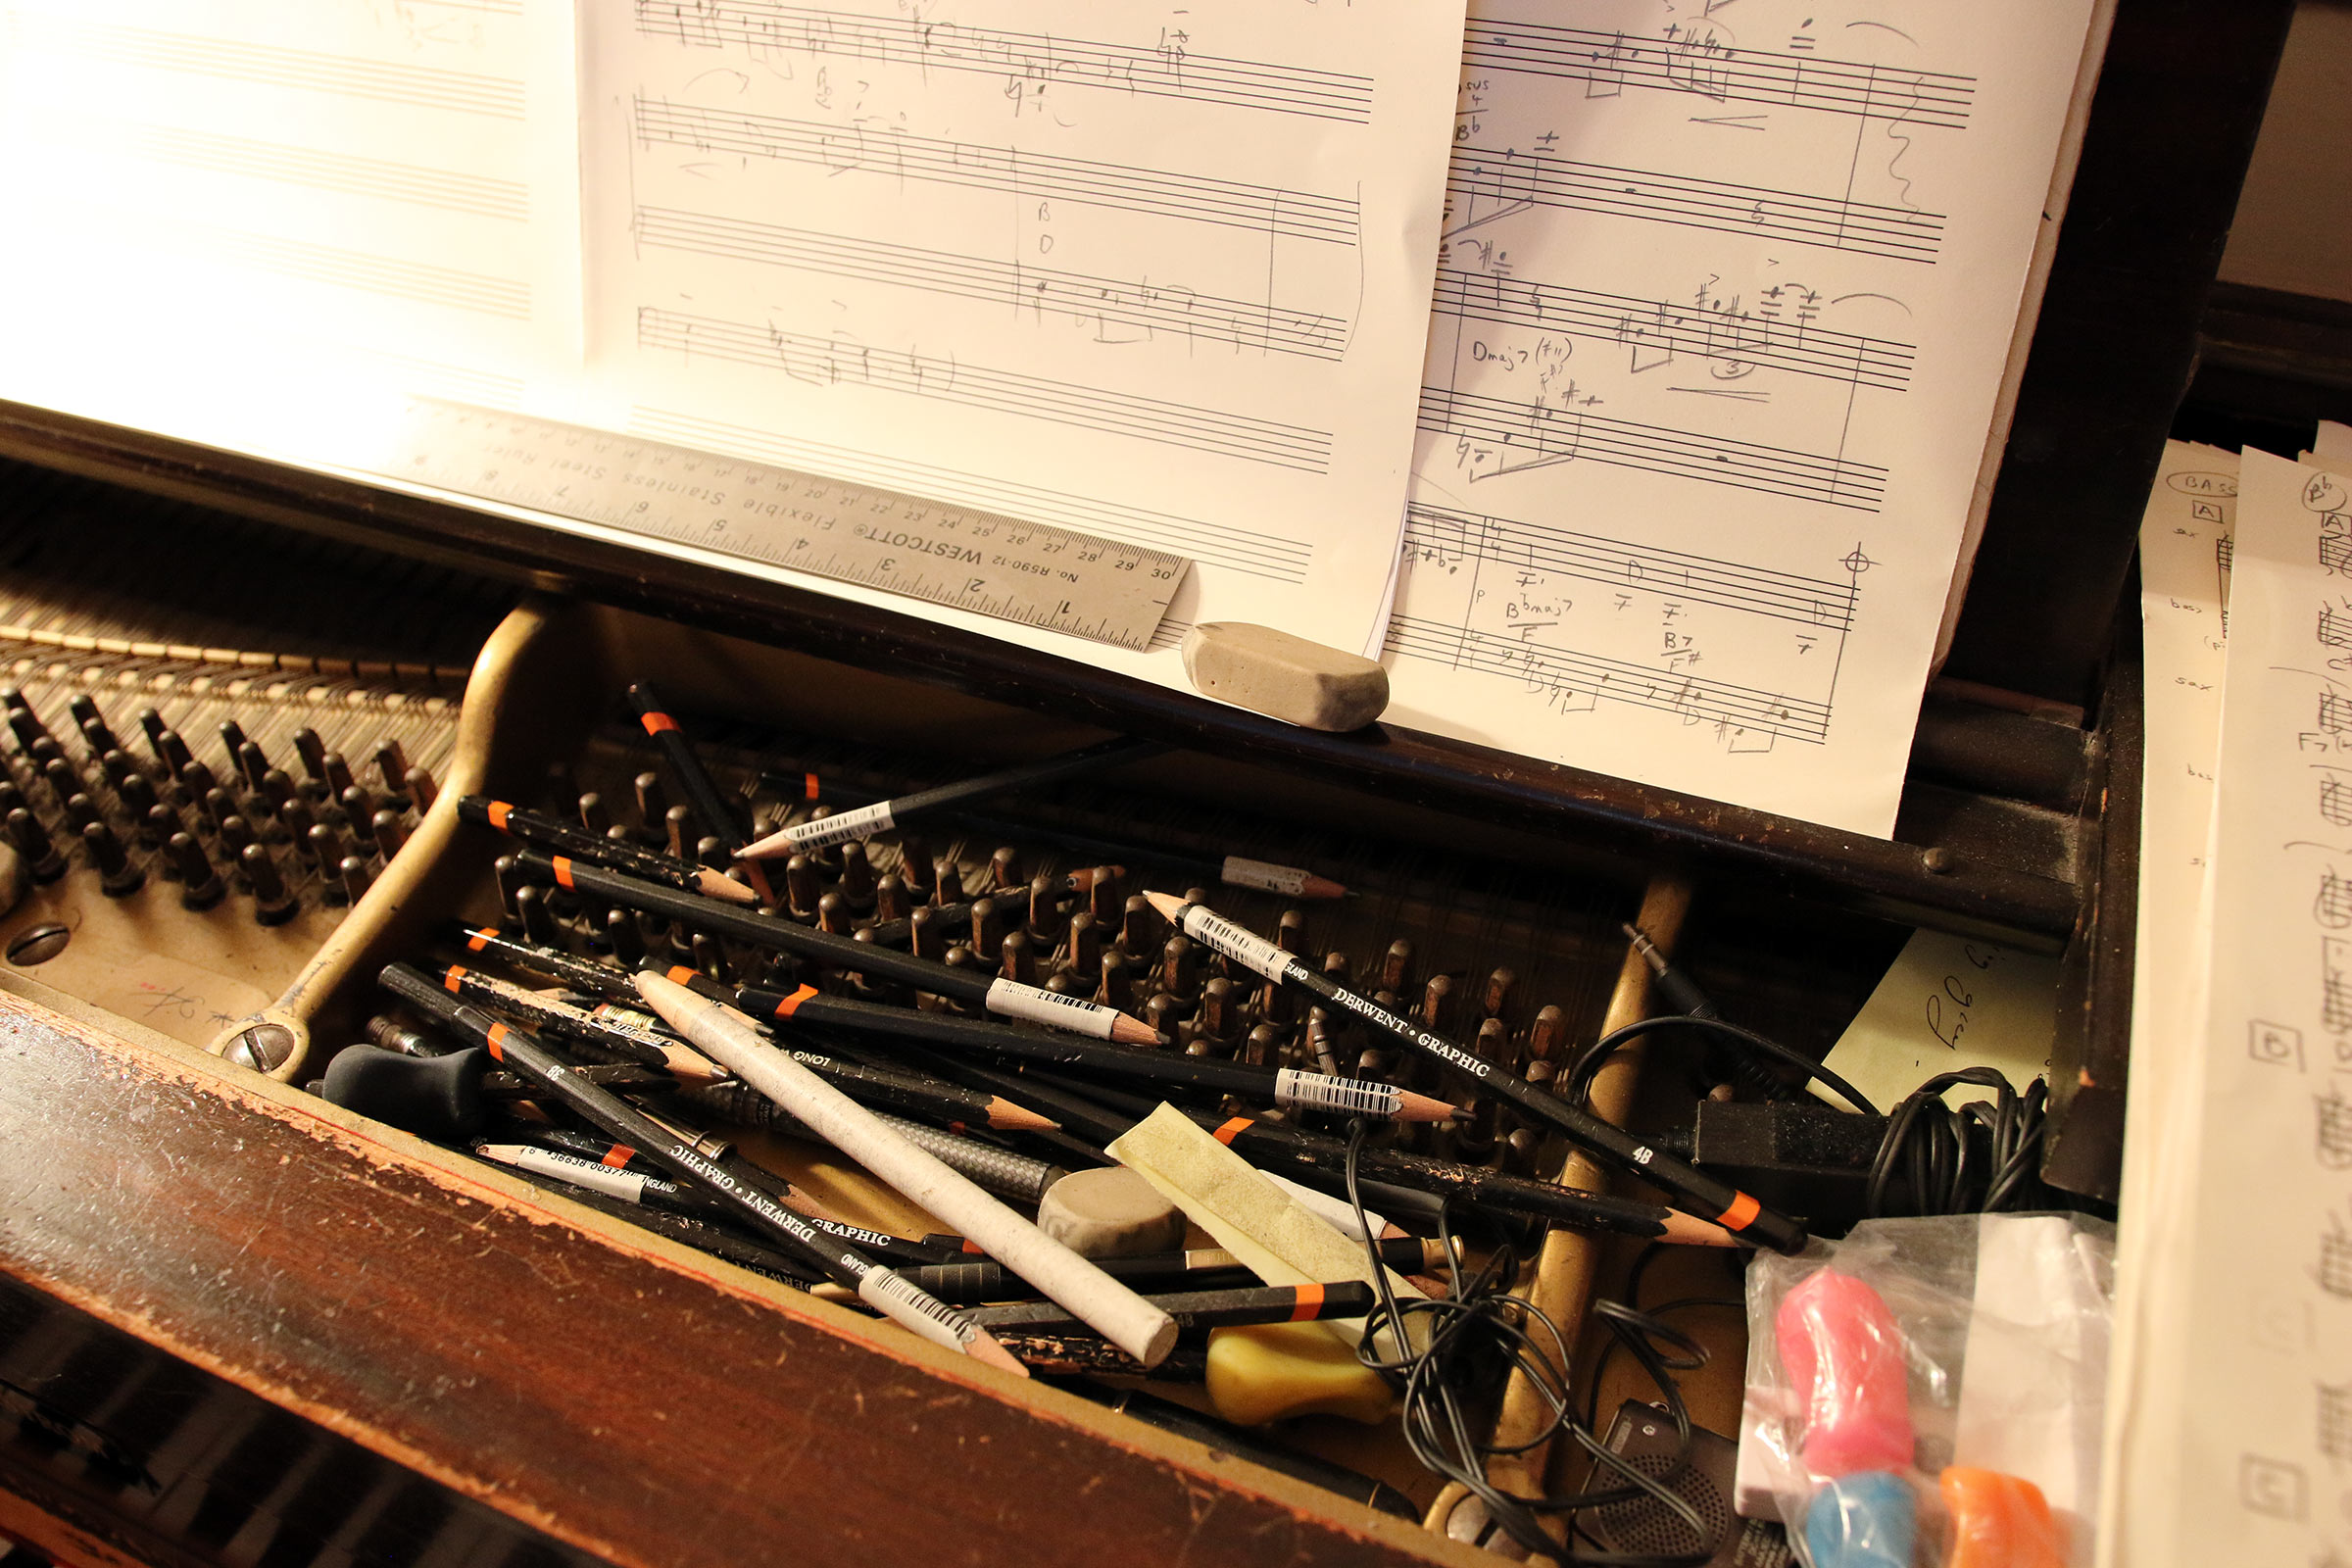 The pile of pencils and erasers that Jane Ira Bloom stuffs inside her piano on the frame in front of the strings and some music manuscript paper.